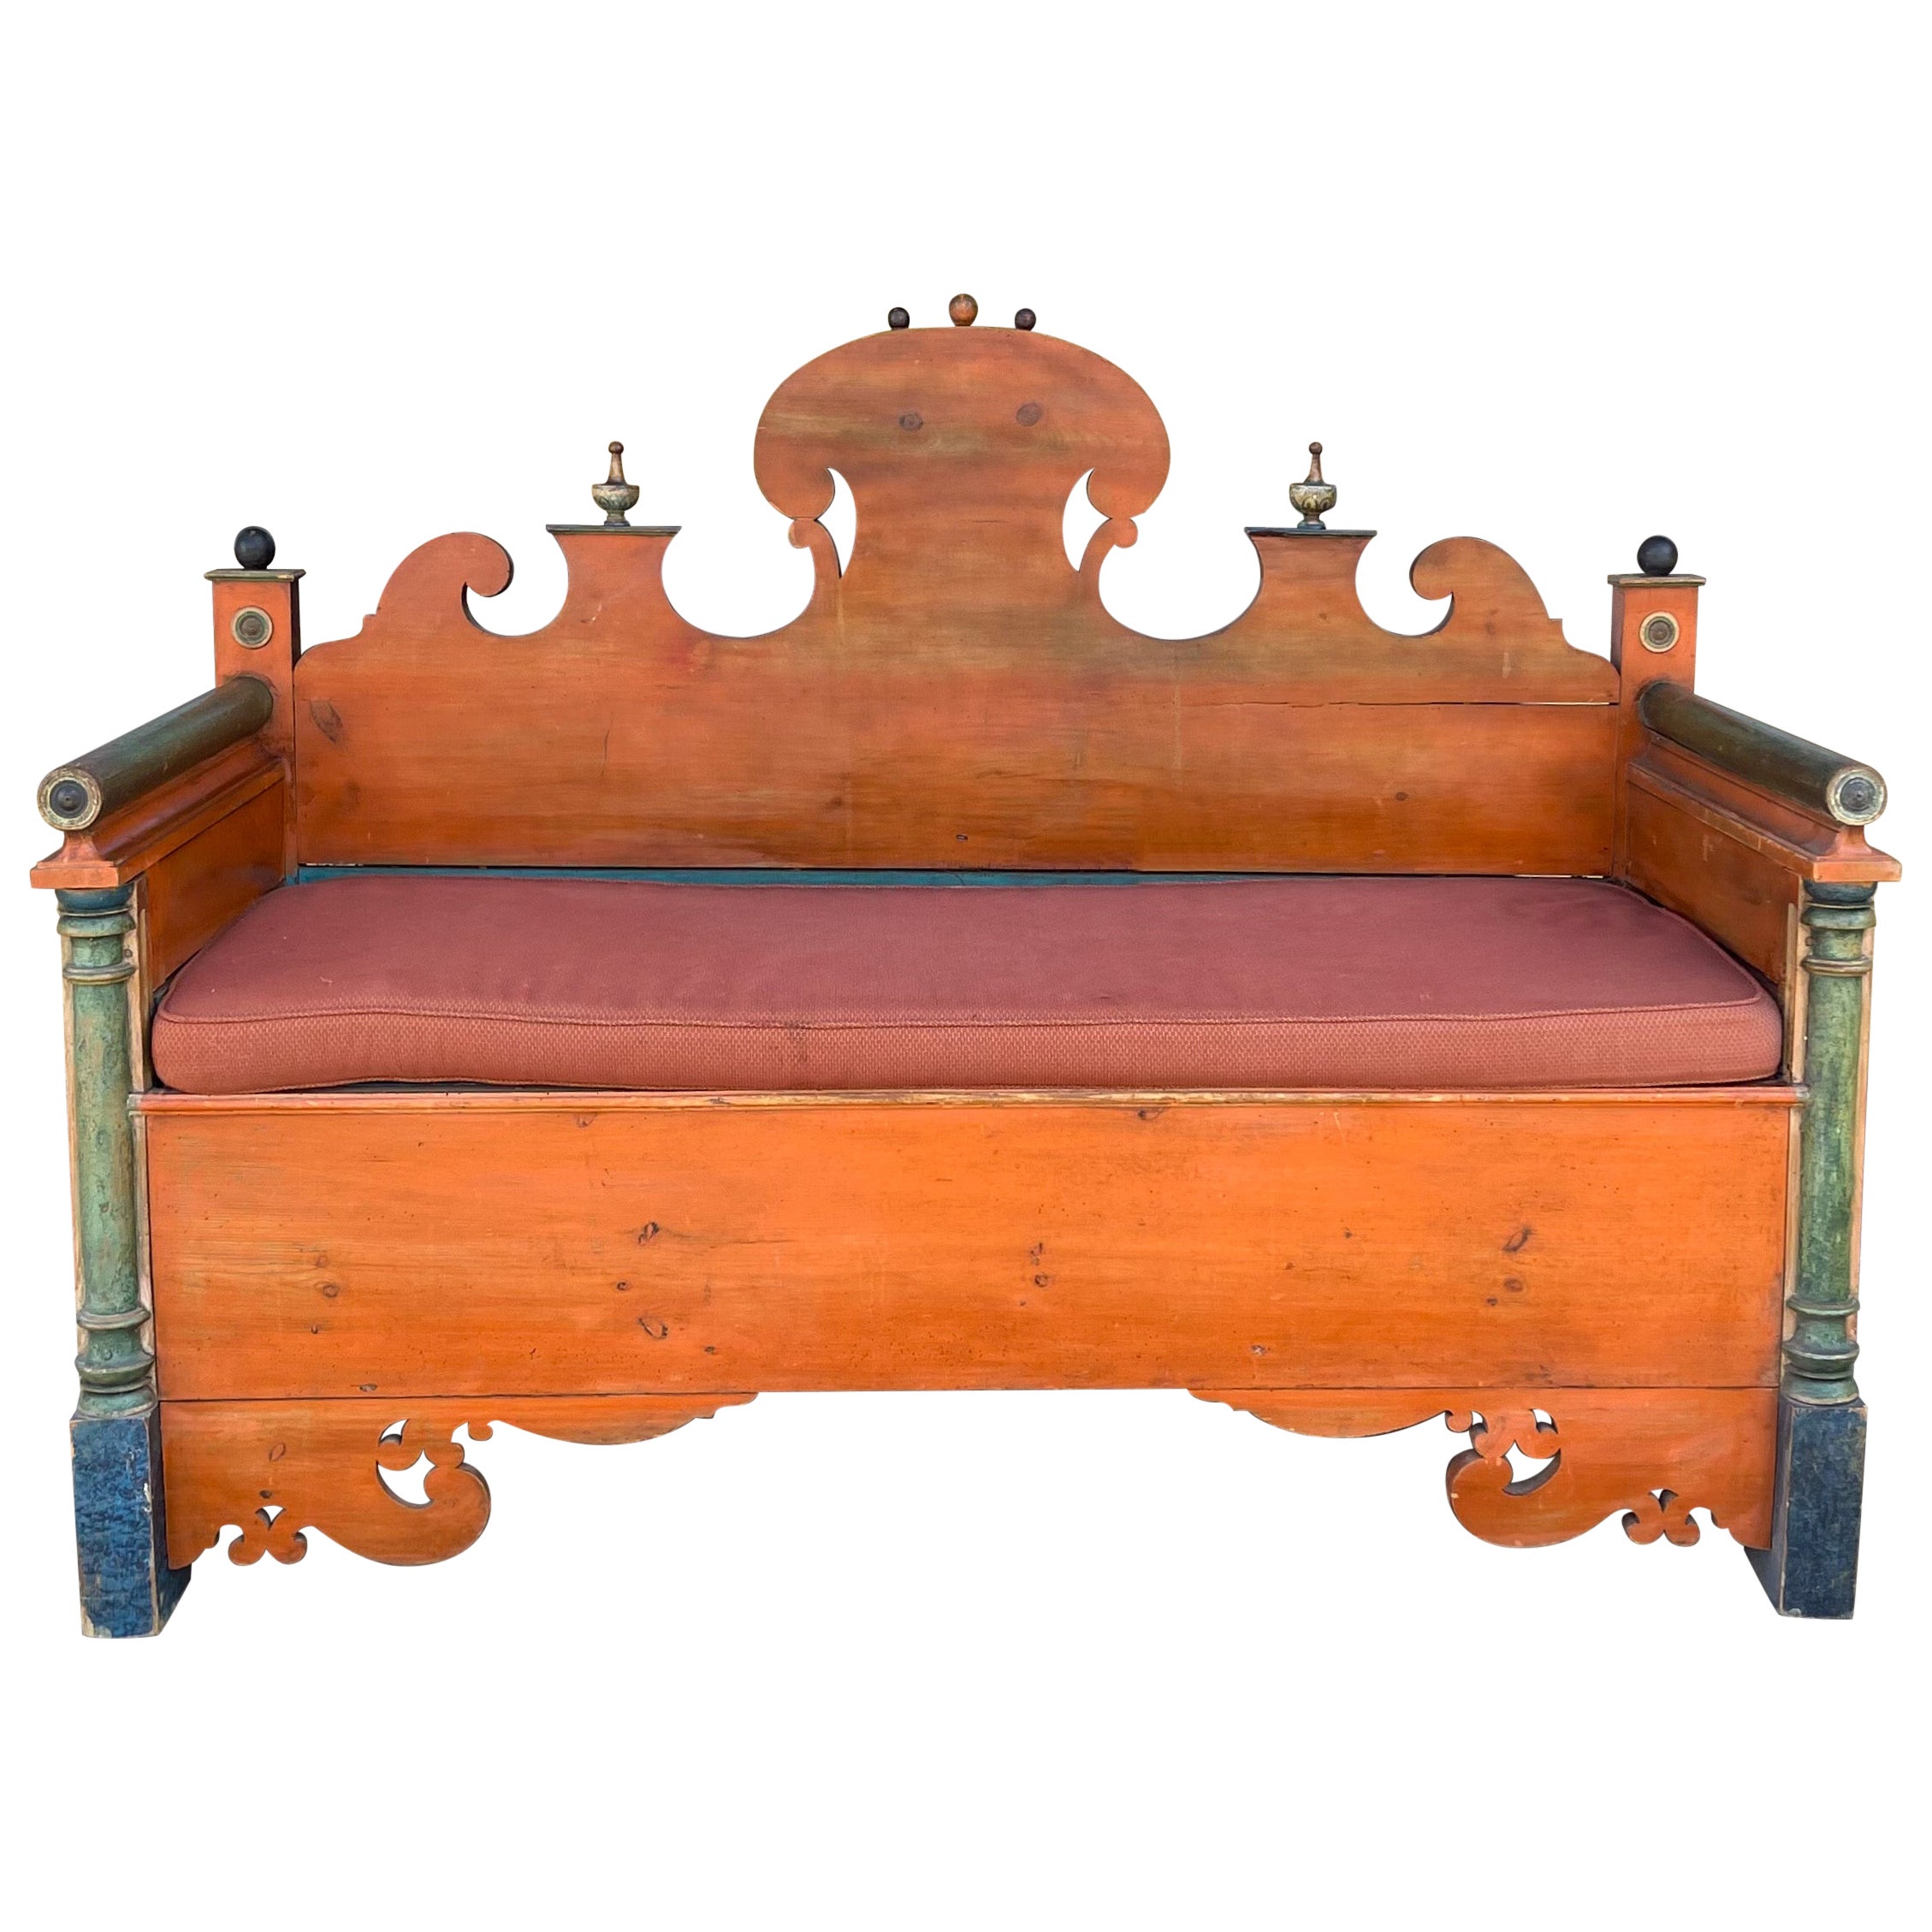 Early 20th-C. Swedish Rustic Painted Pine Bench or Settee with Storage For Sale